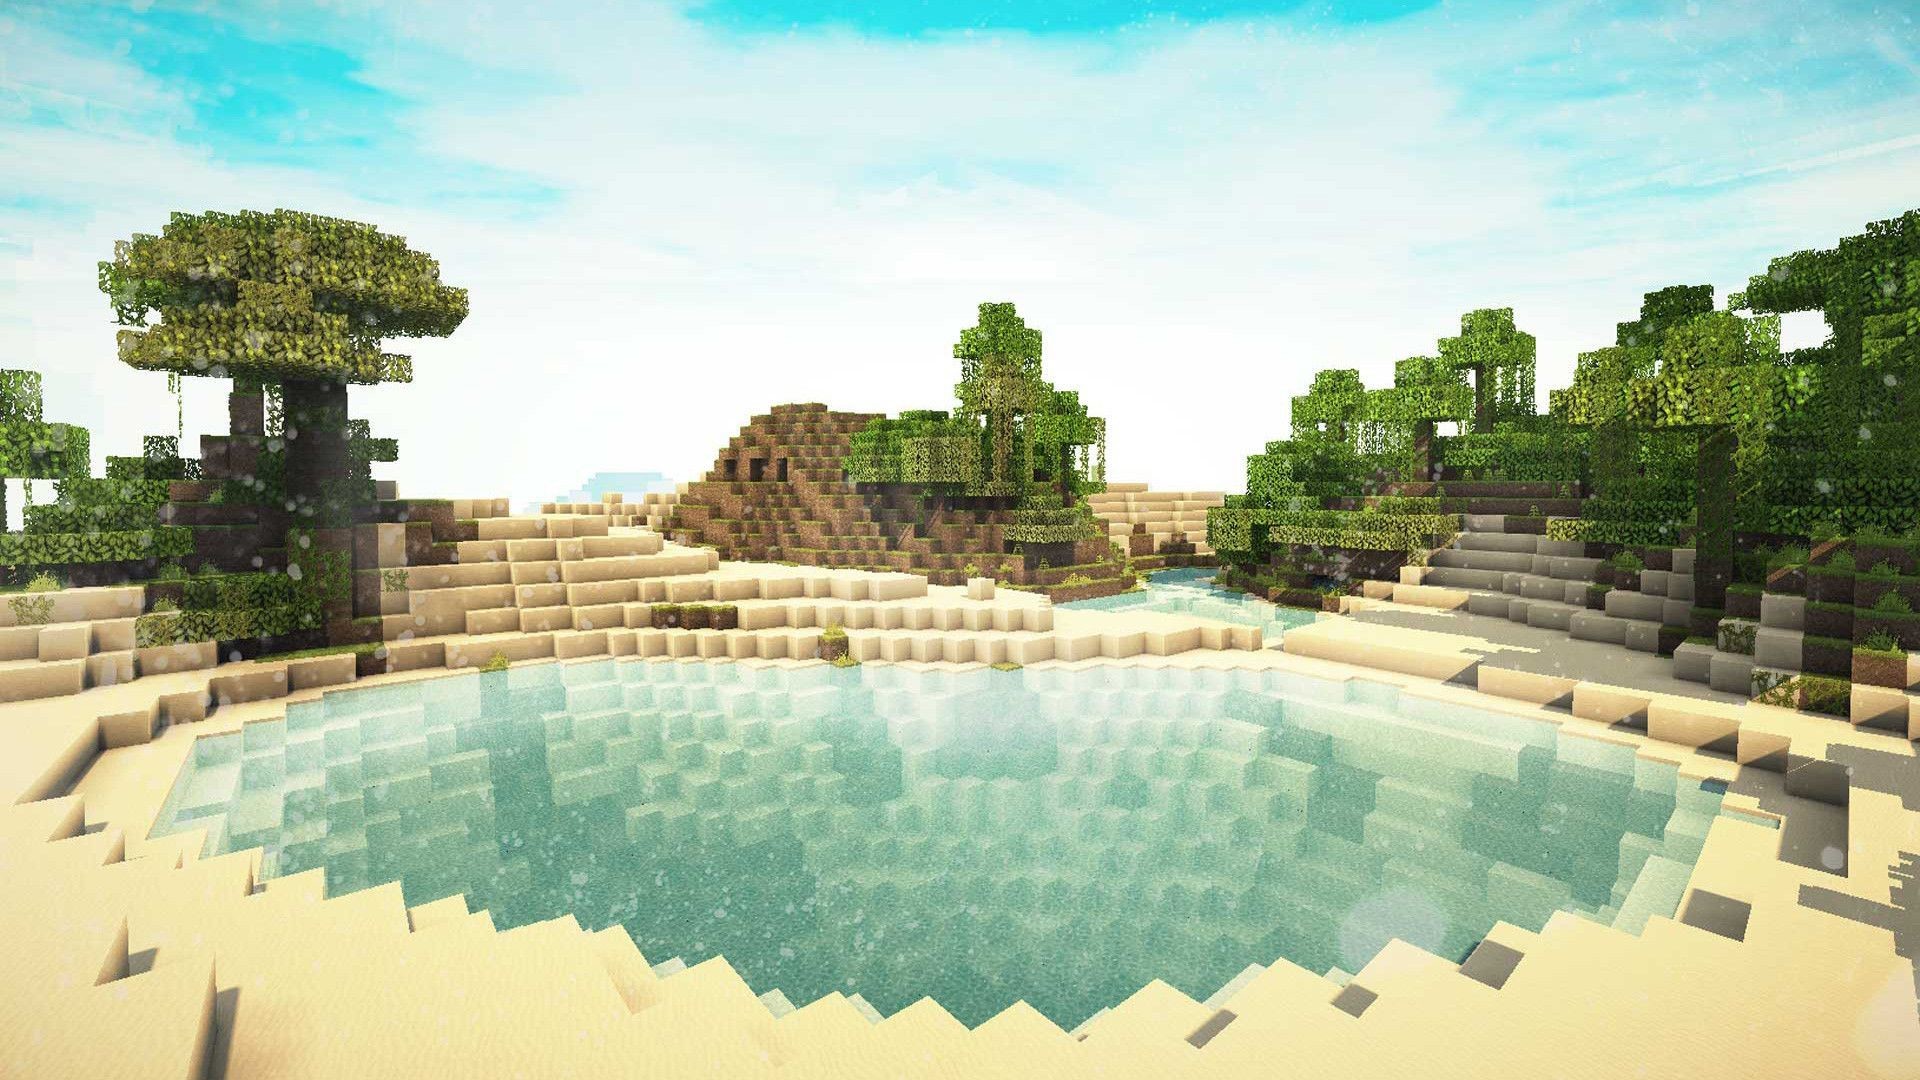 1920x1080 HD Wallpapers Of Minecraft